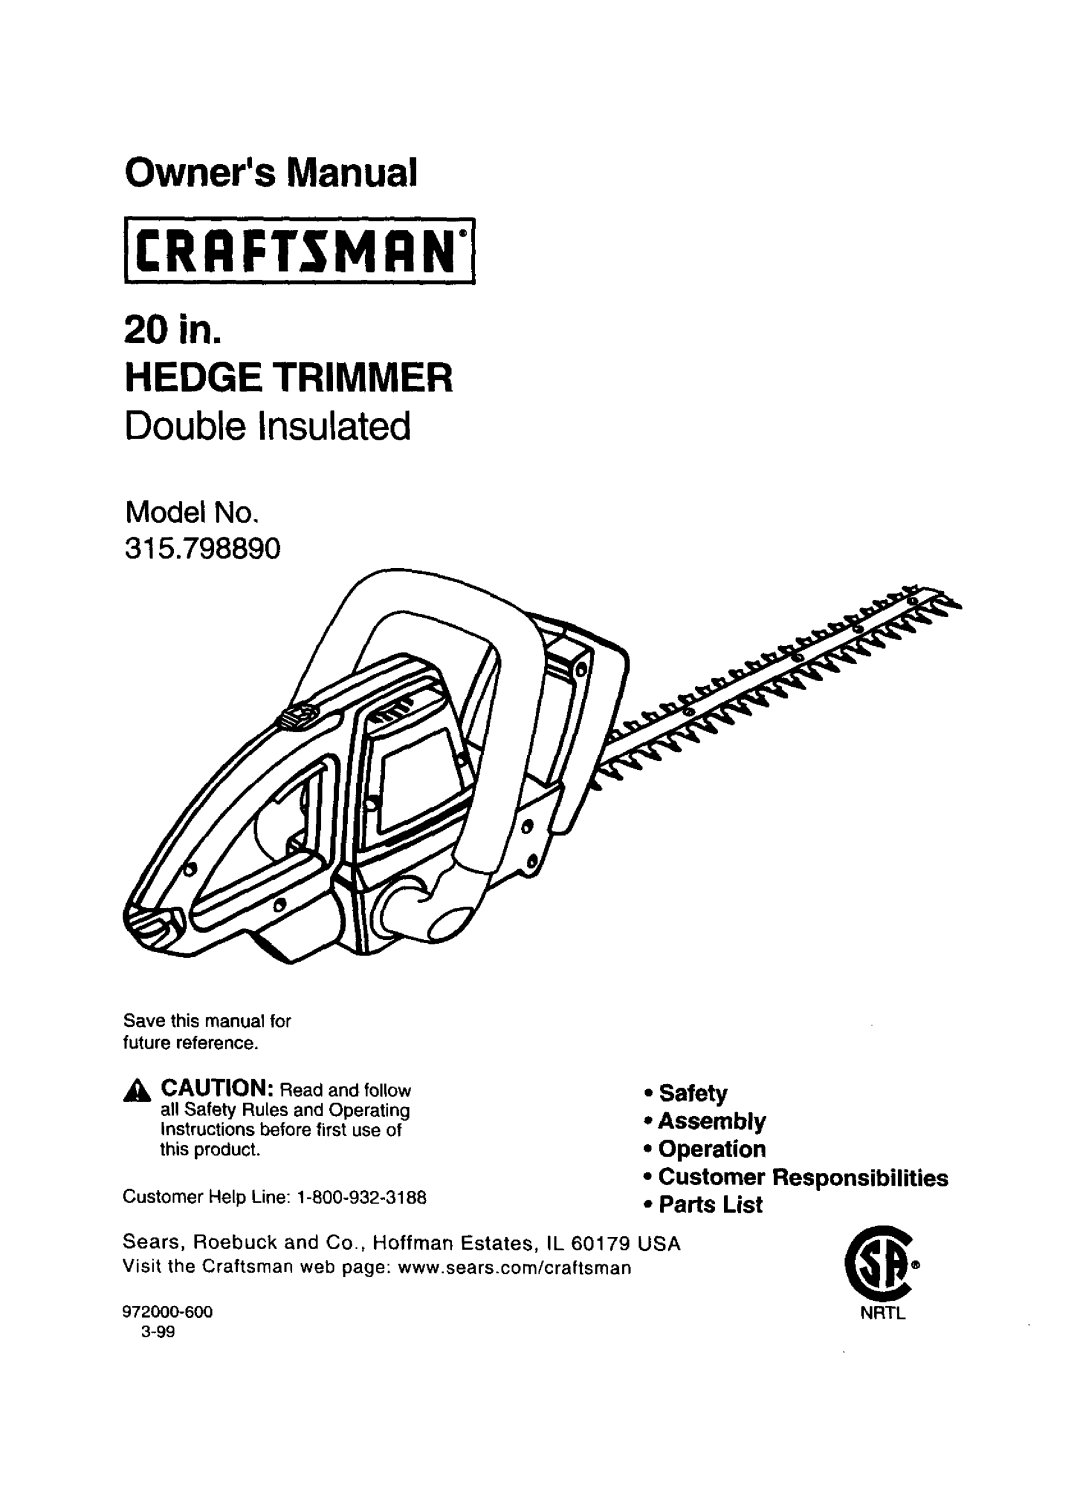 Craftsman 315.79889 owner manual CAUTION Read and follow, Safety Assembly Operation, Customer Responsibilities Parts List 